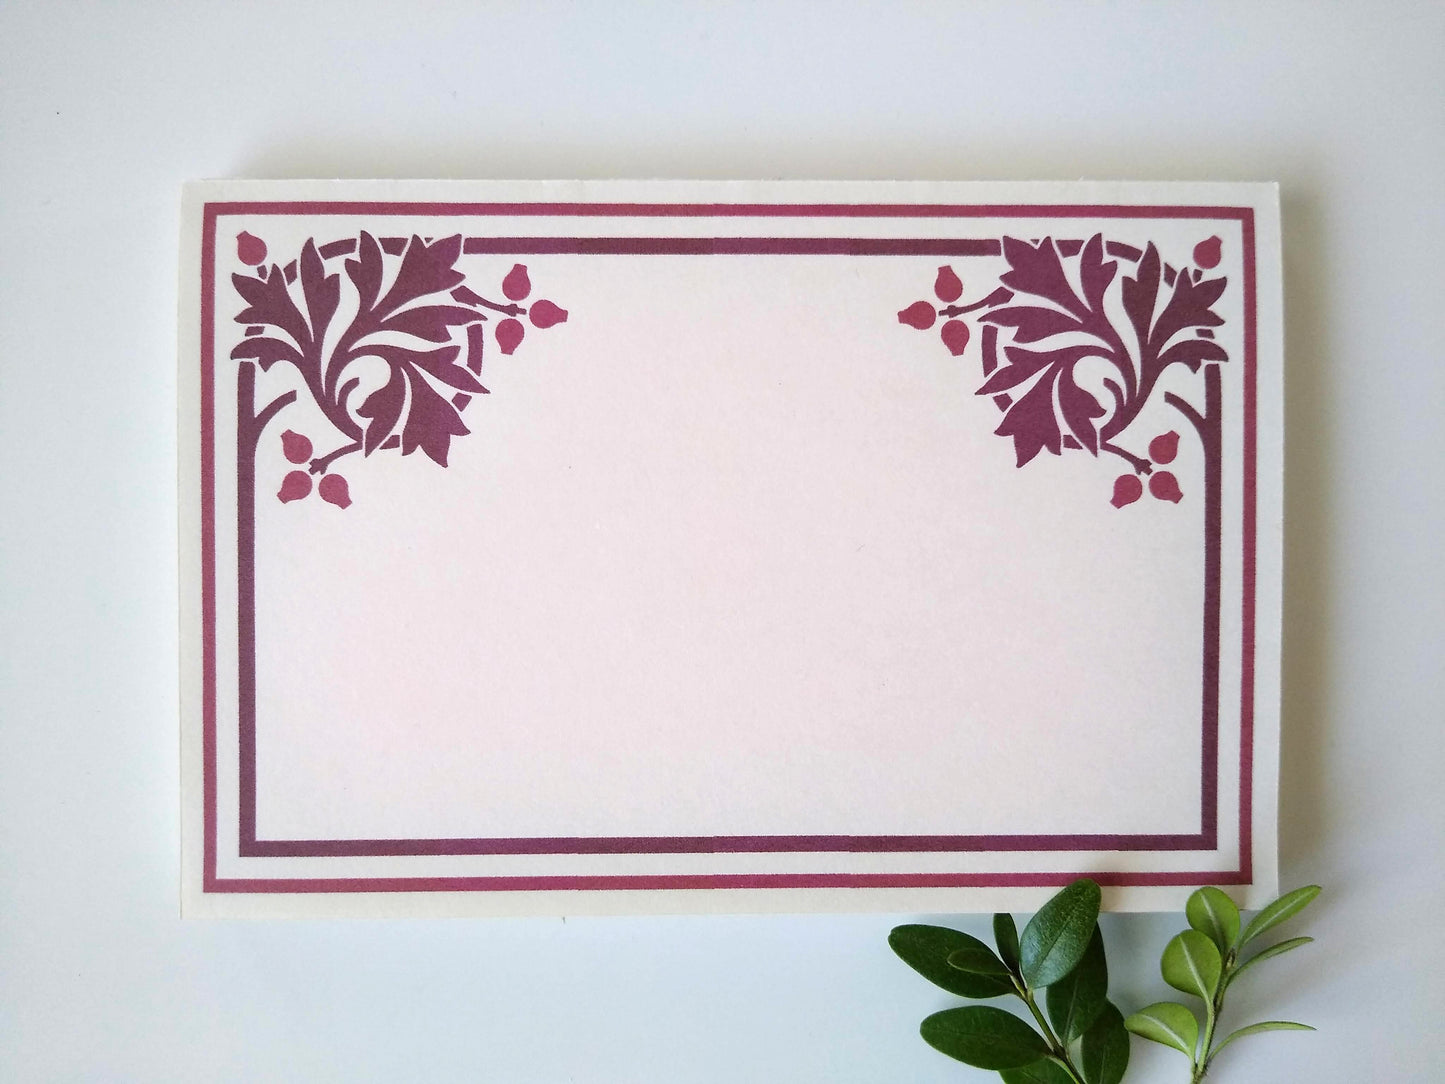 A single notepad with a stylized sassafras leaf design in both upper corners. There is a double line border around the whole notepad. Two small sprigs of leaves rest under the upper left hand corner.